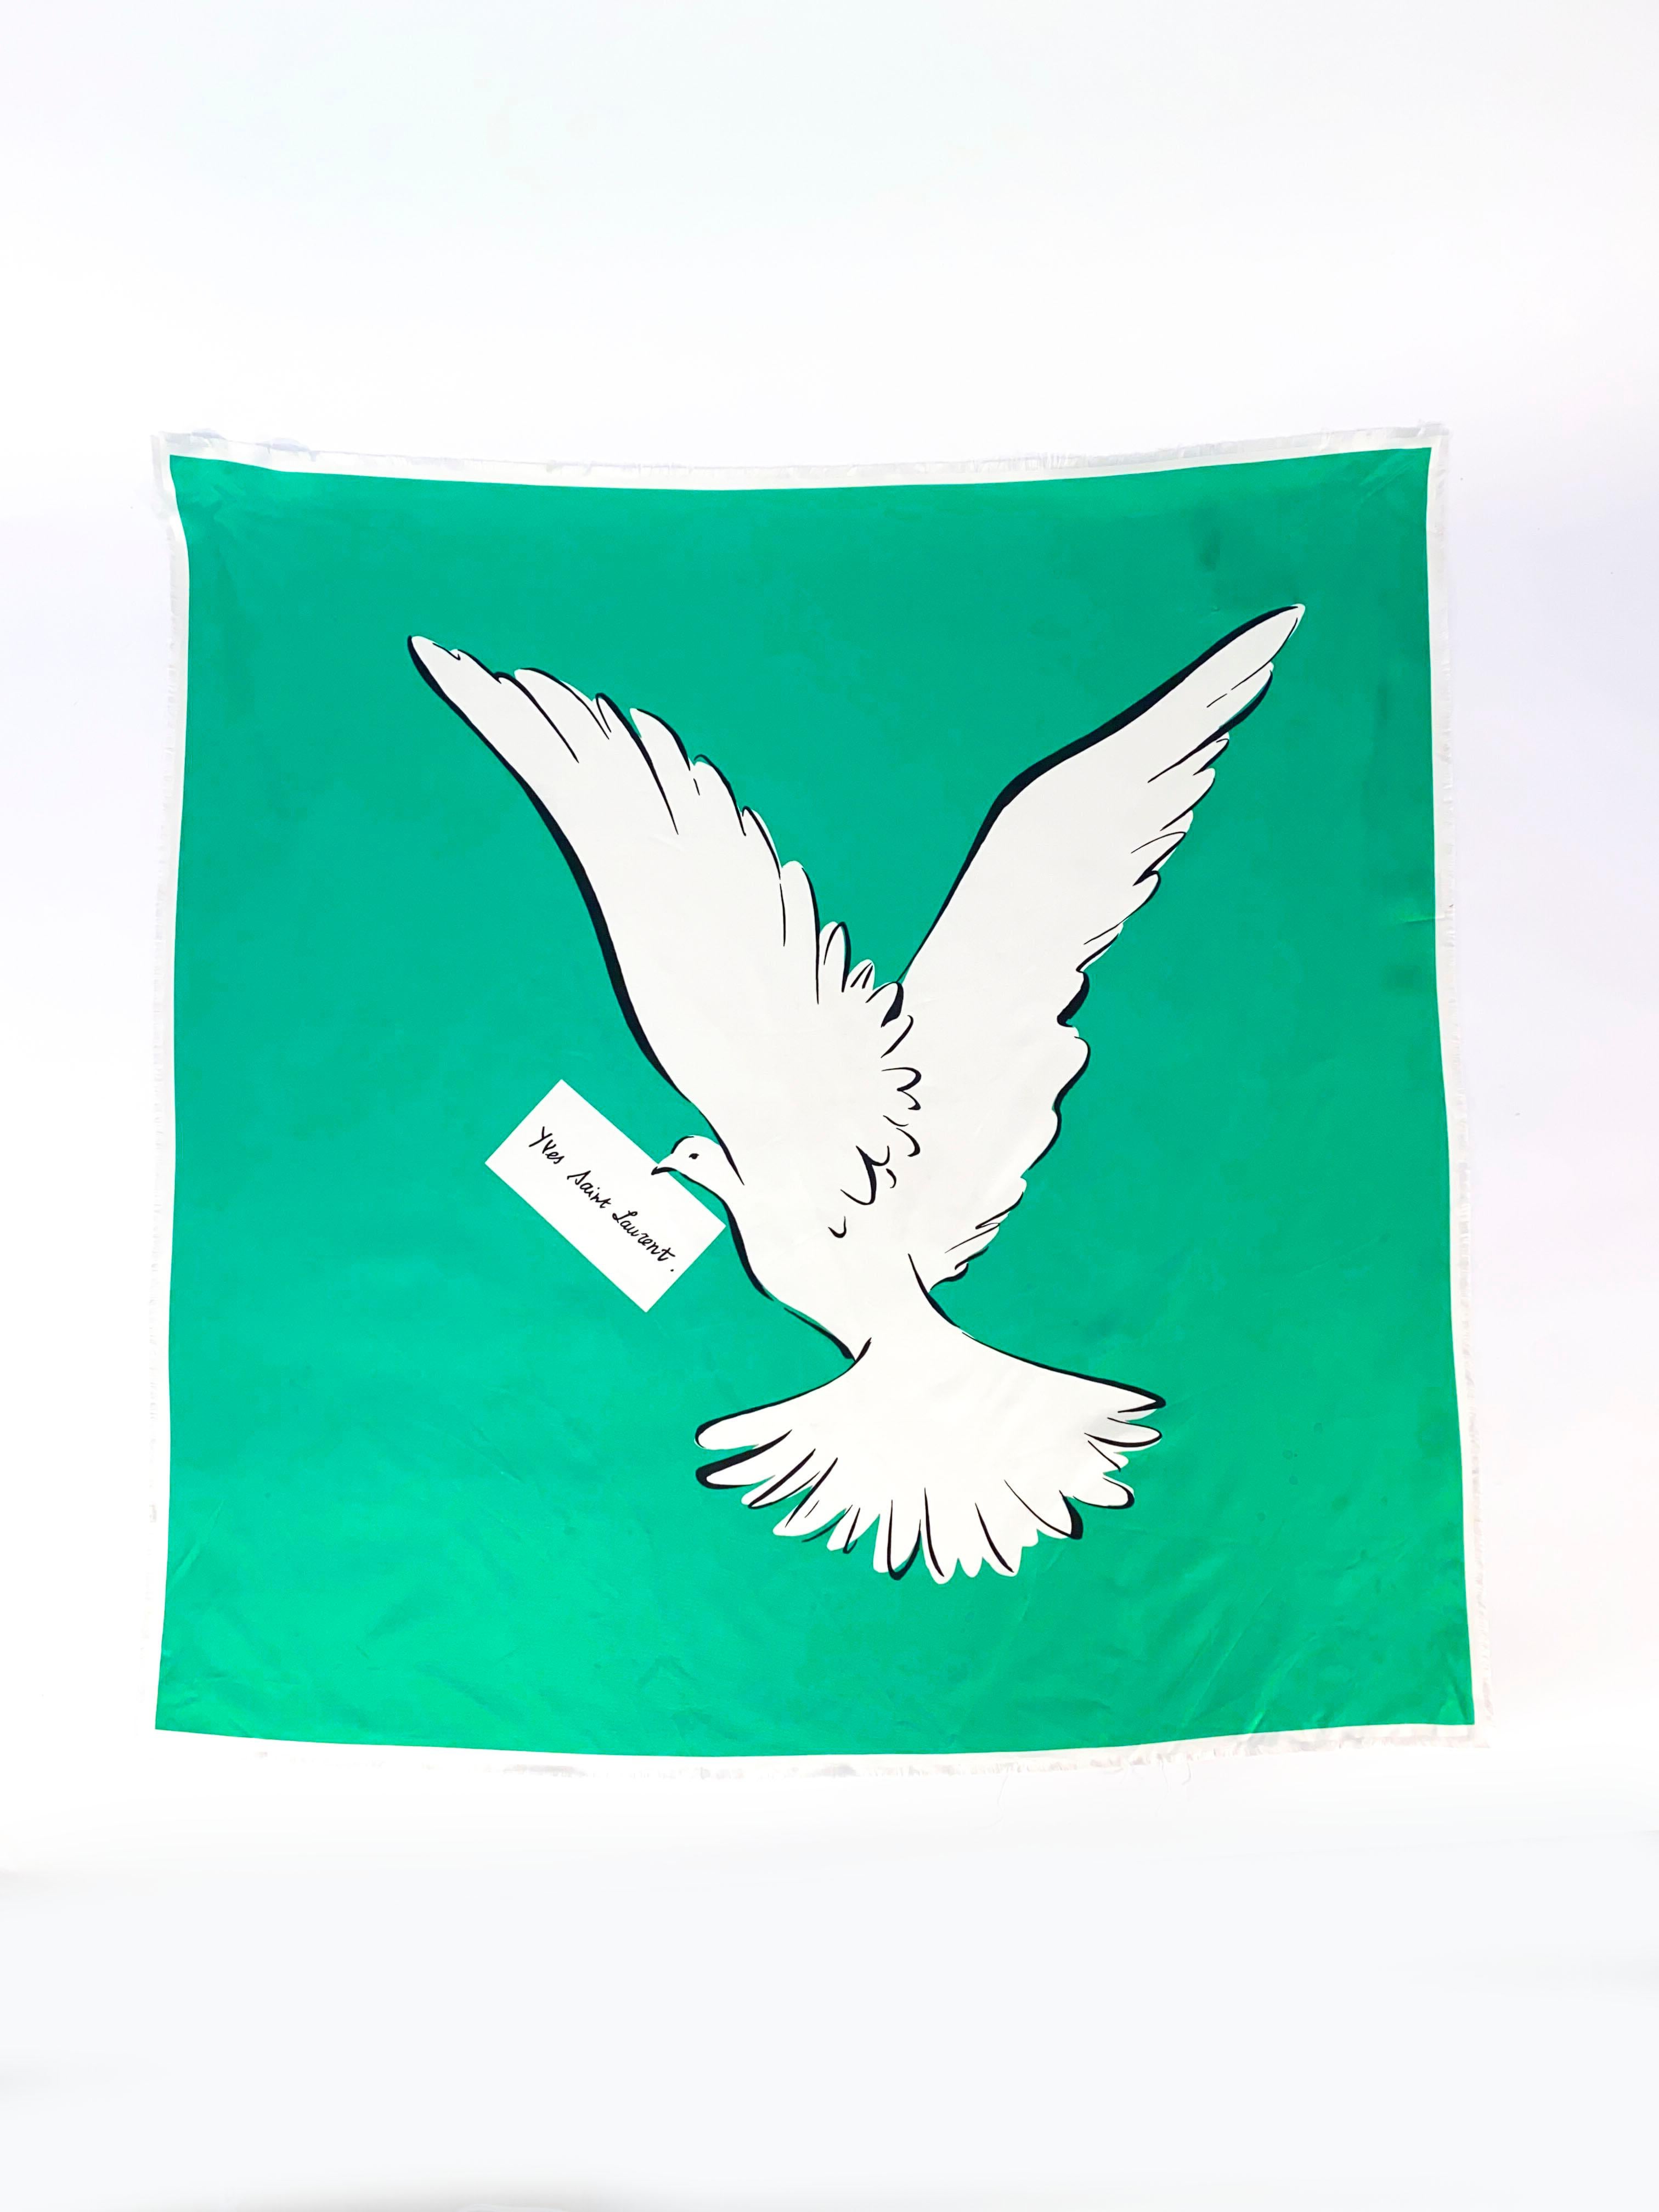 1980's Yves Saint Laurent silk scarf in green featuring a white dove of peace. The edges are stylistically frayed and have a slight white boarder. 